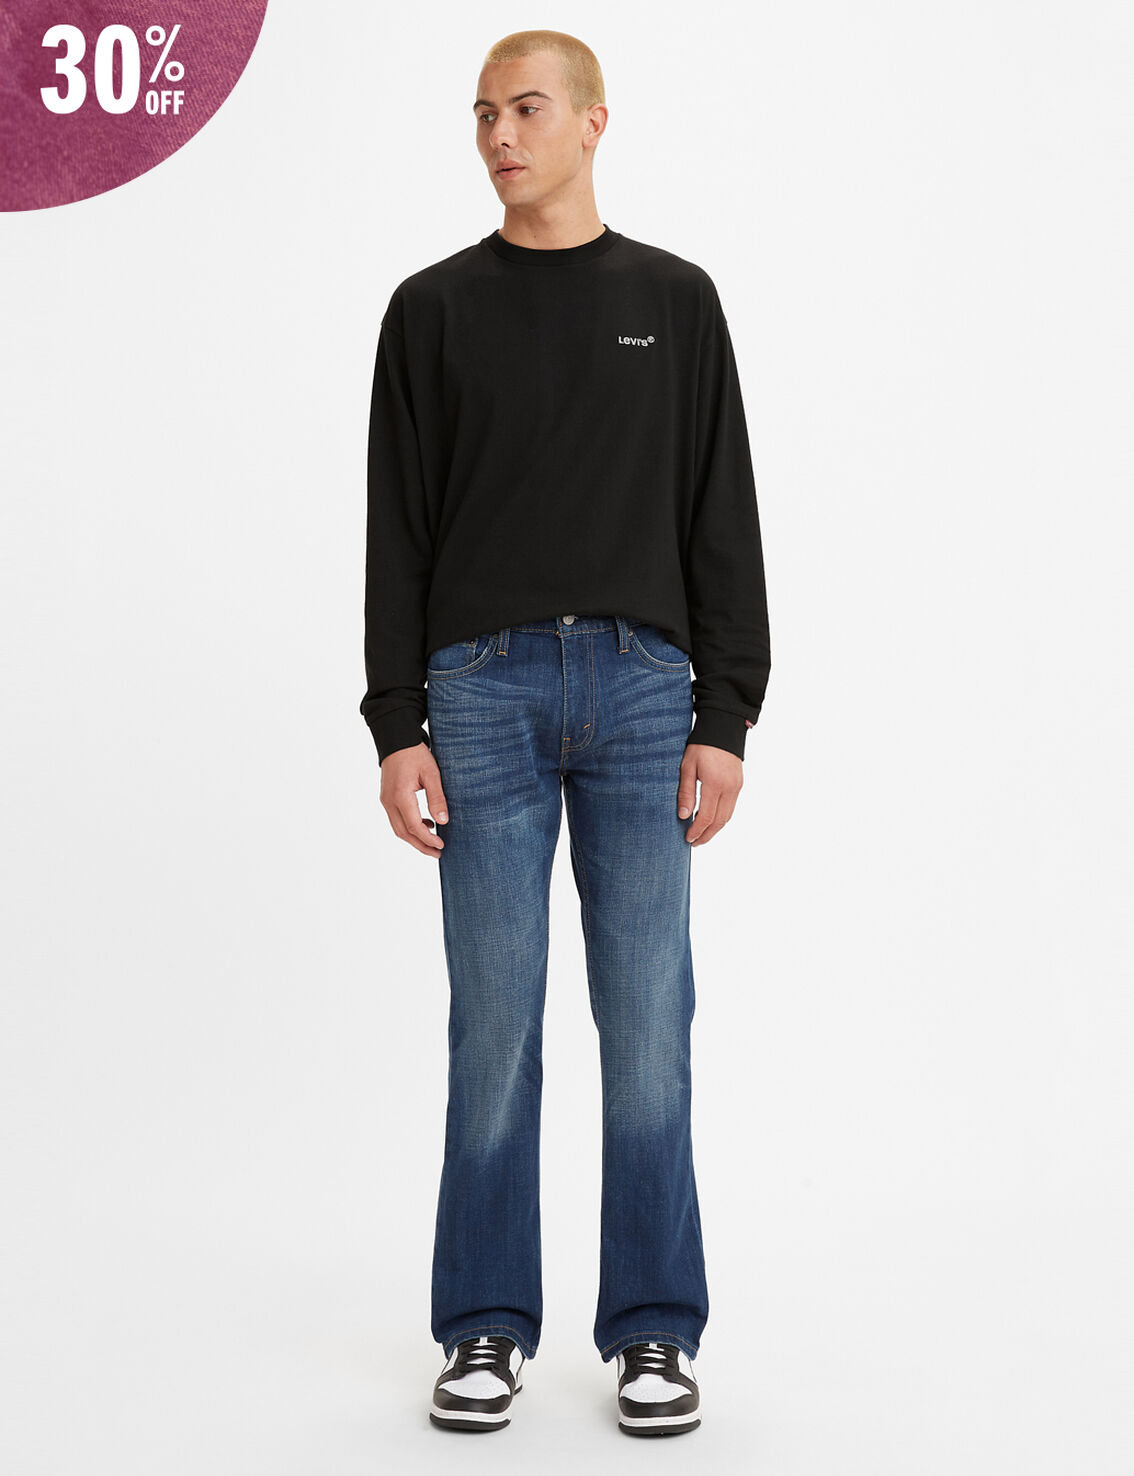 527™ Slim Bootcut Jeans in Wave Allusions